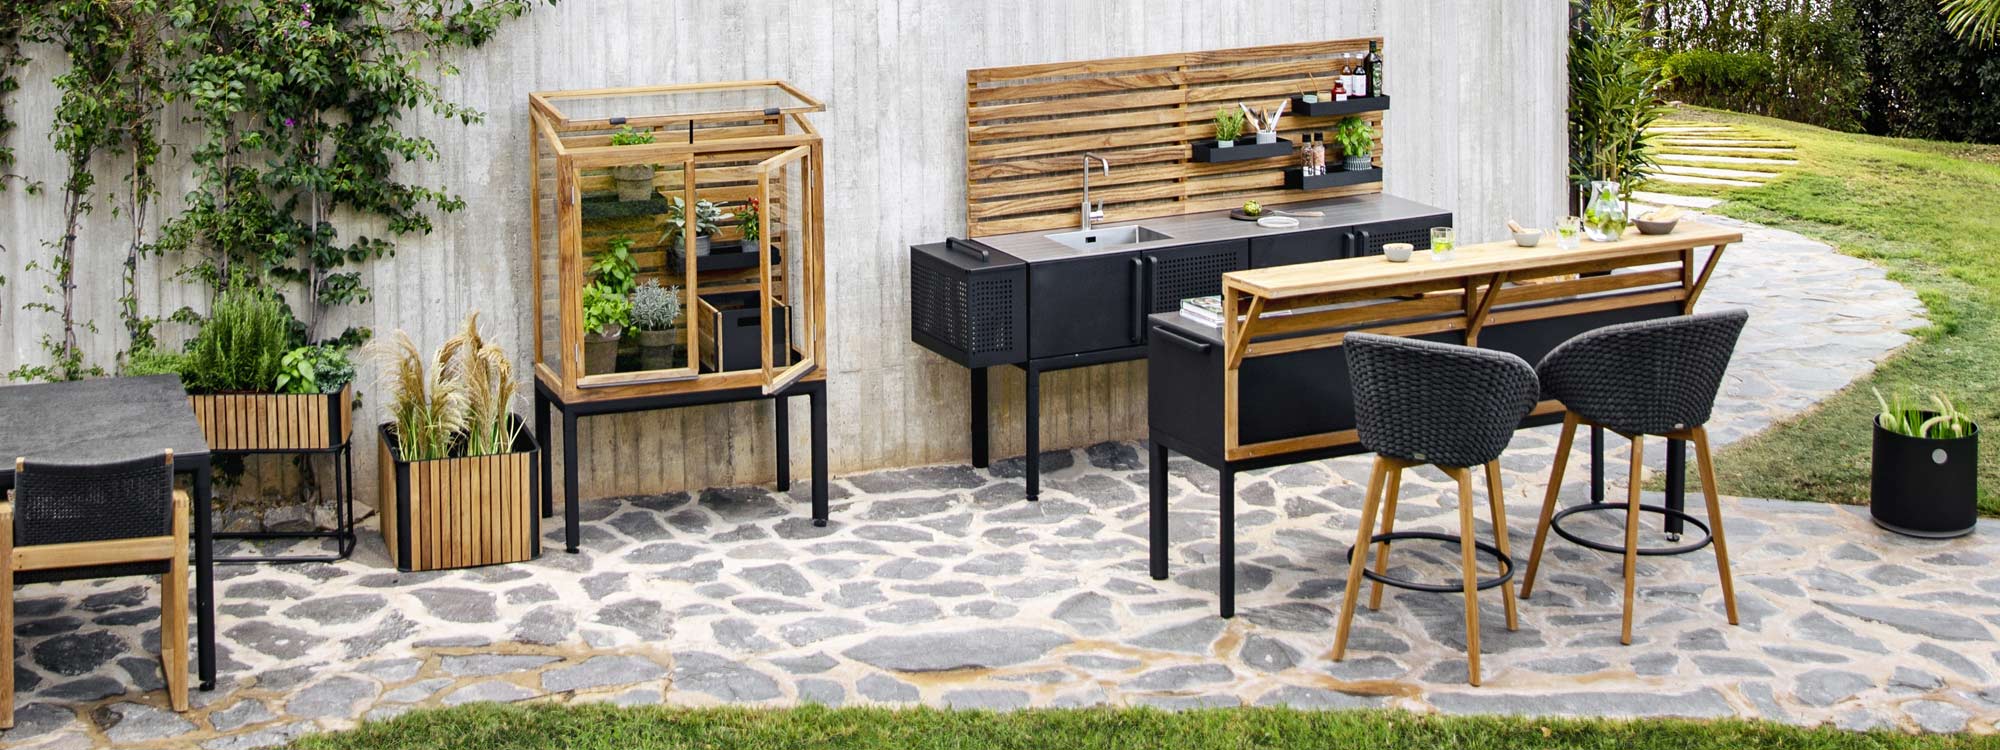 Image of Peacock outdoor bar stools and Caneline Drop outdoor kitchen island and bar counter